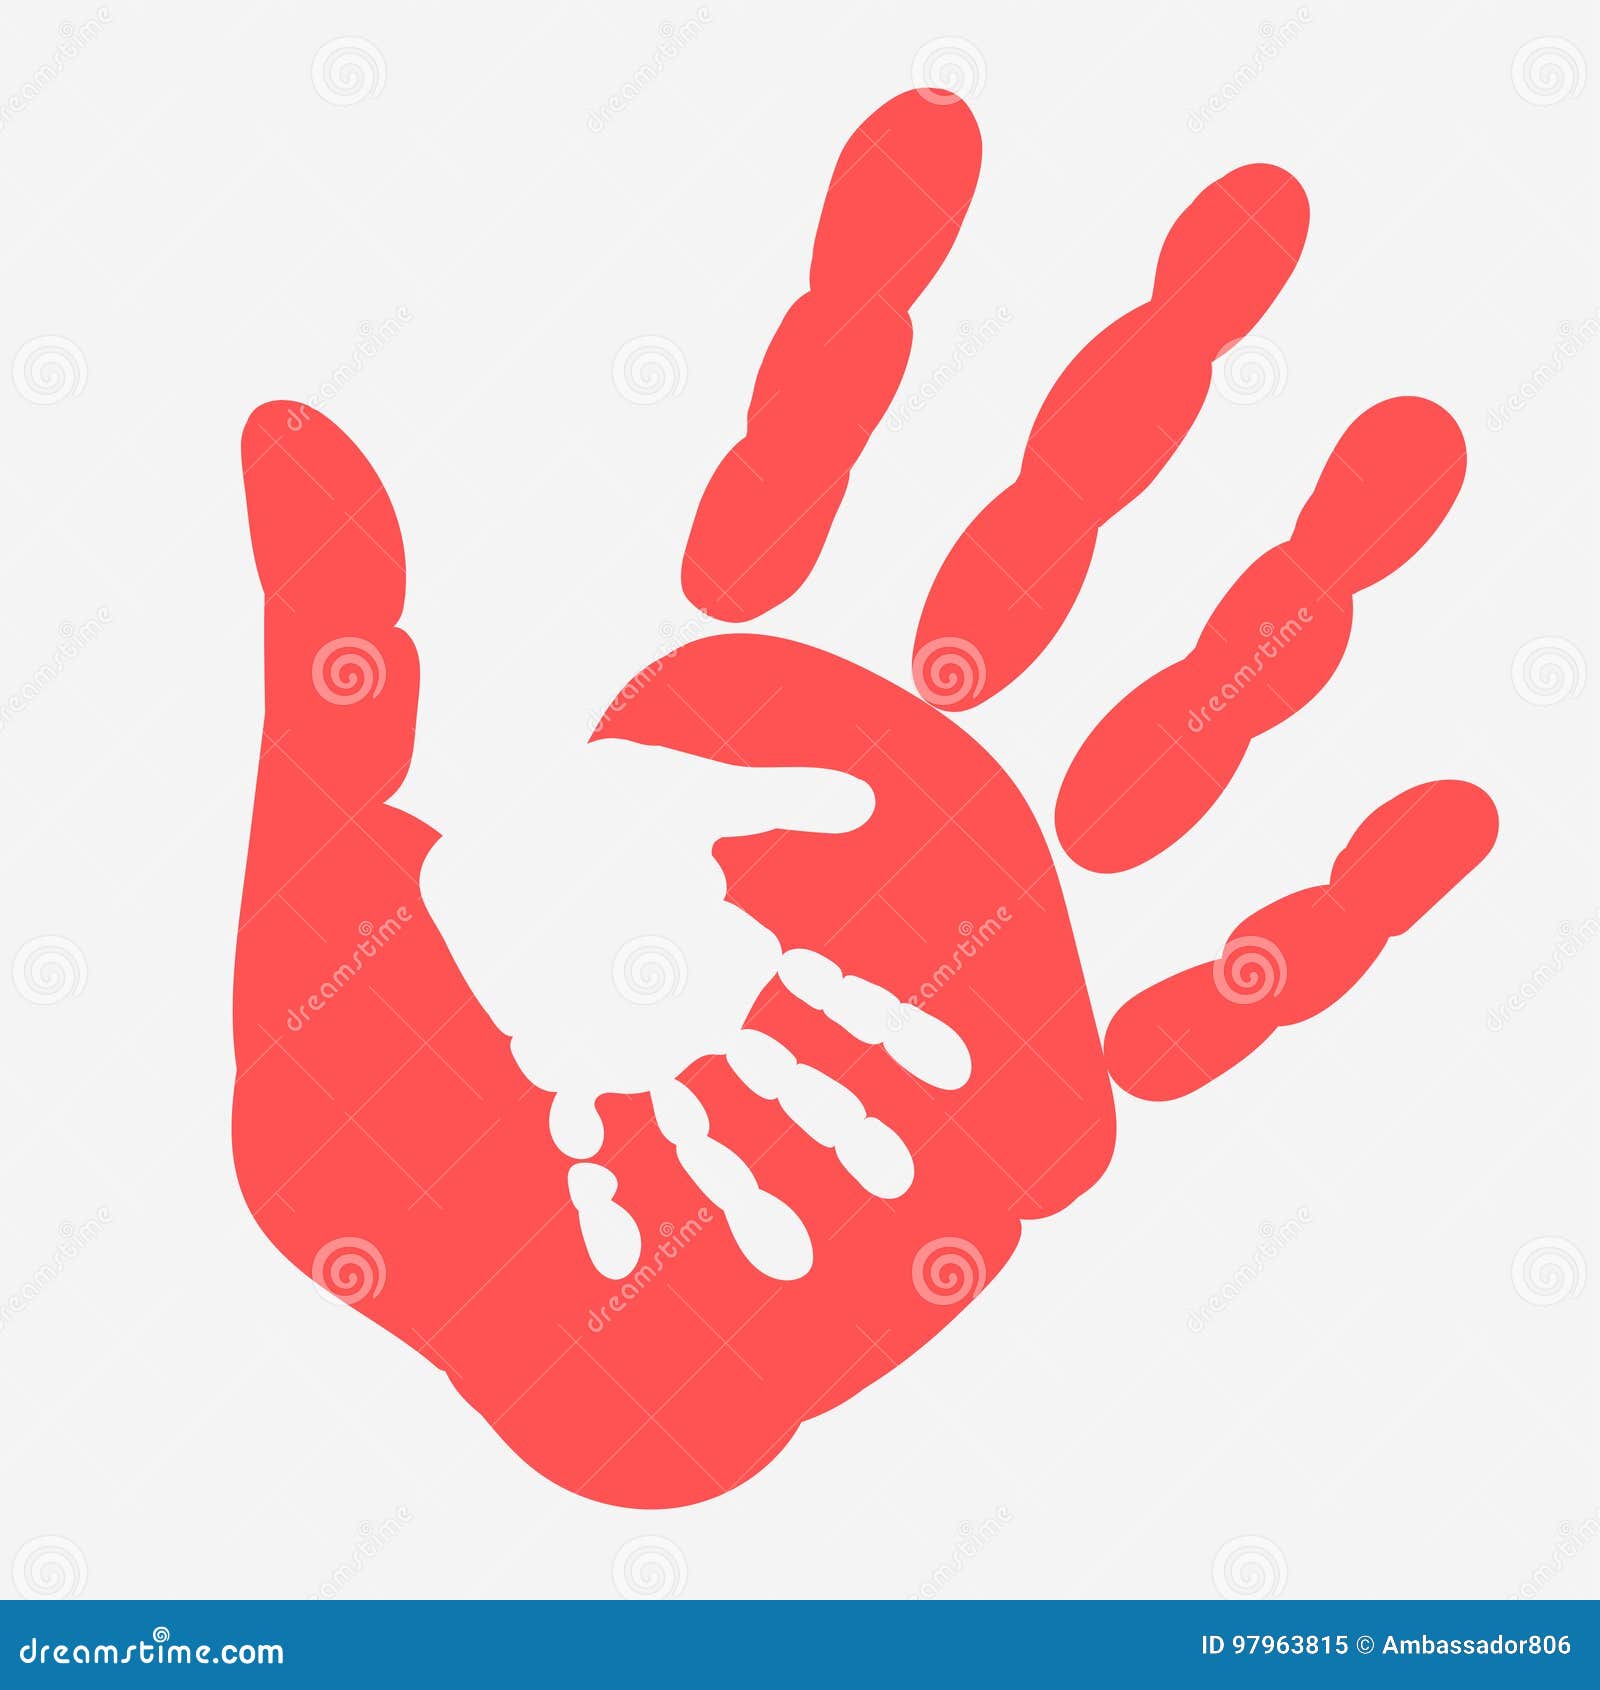 Mother And Child Handprint Palm Of Woman And Baby Stock Vector Illustration Of Parenthood Childhood 97963815